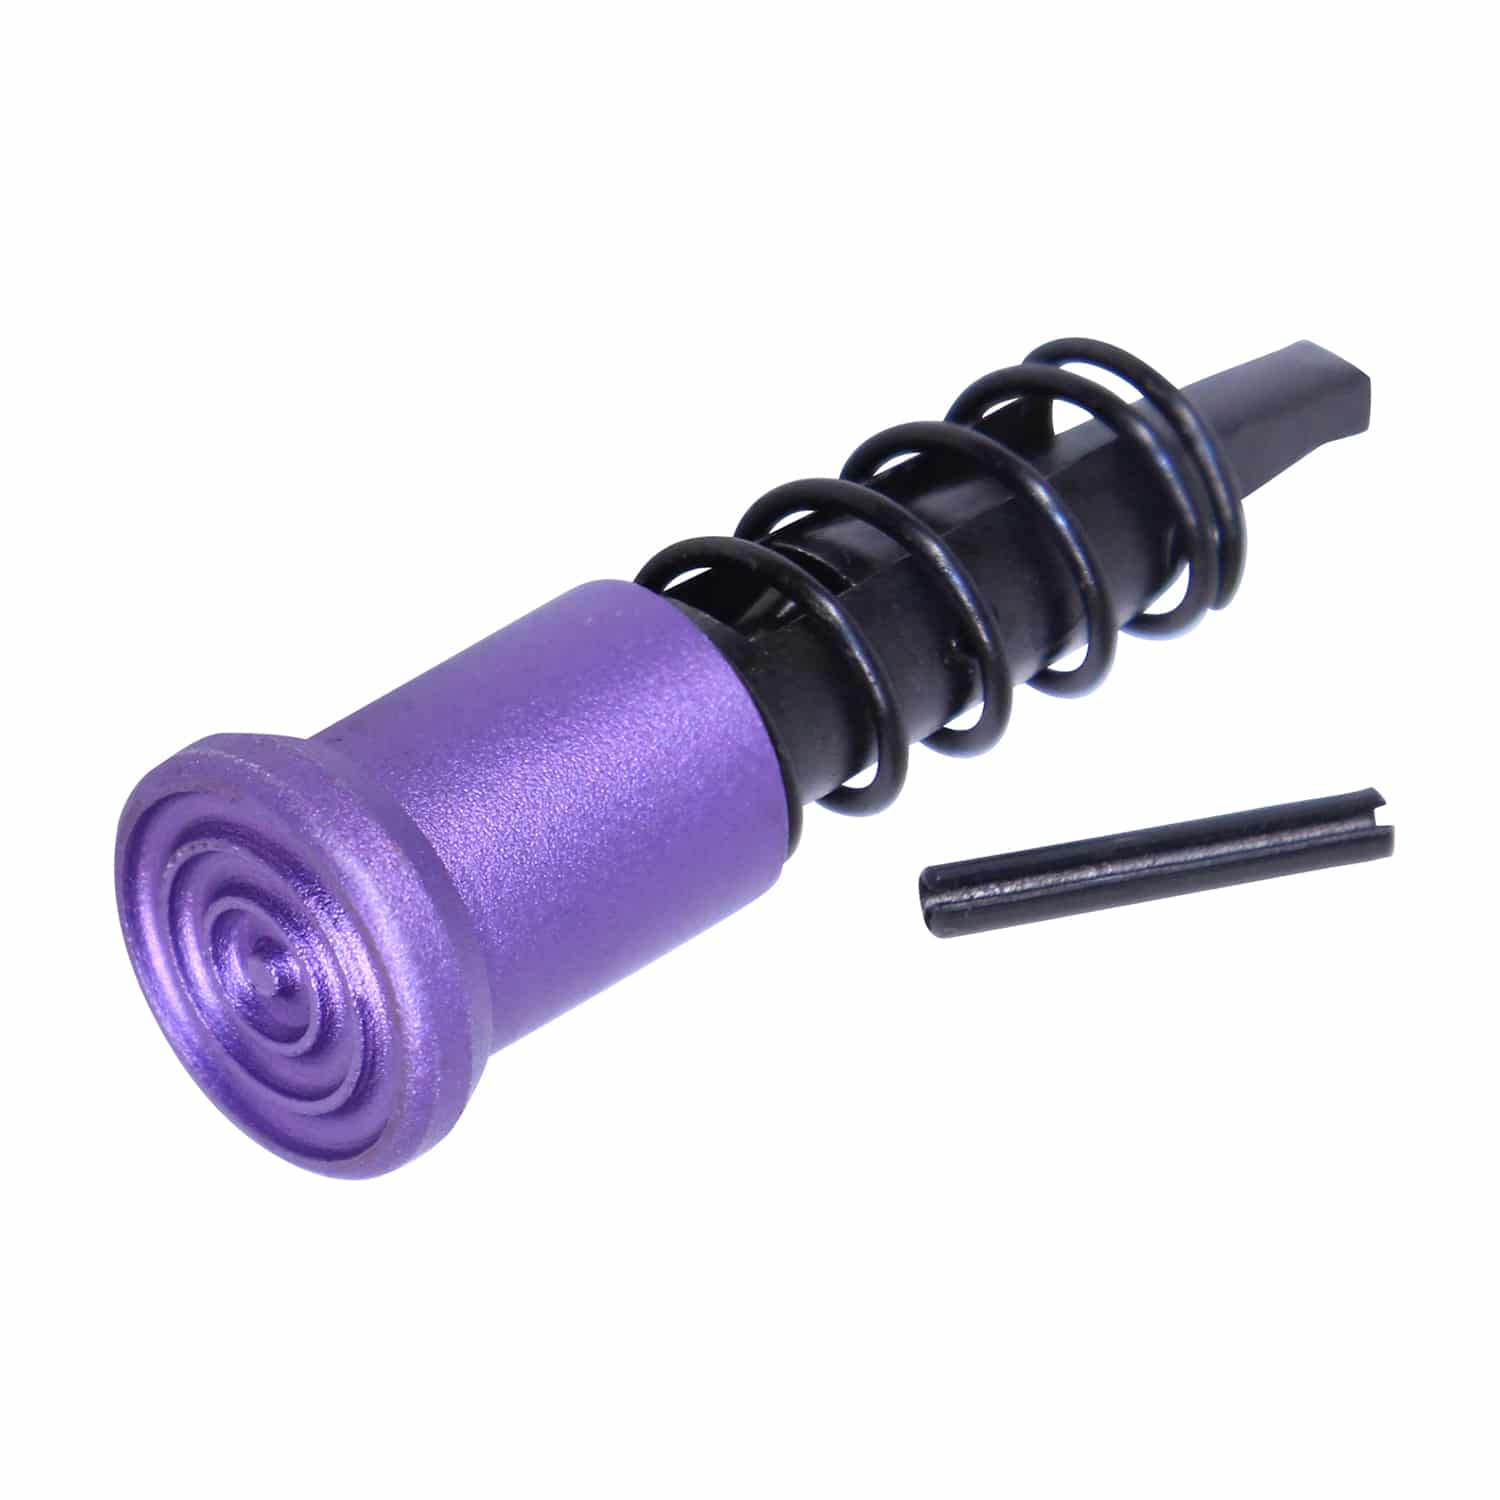 AR-15 Forward Assist Assembly in Anodized Purple